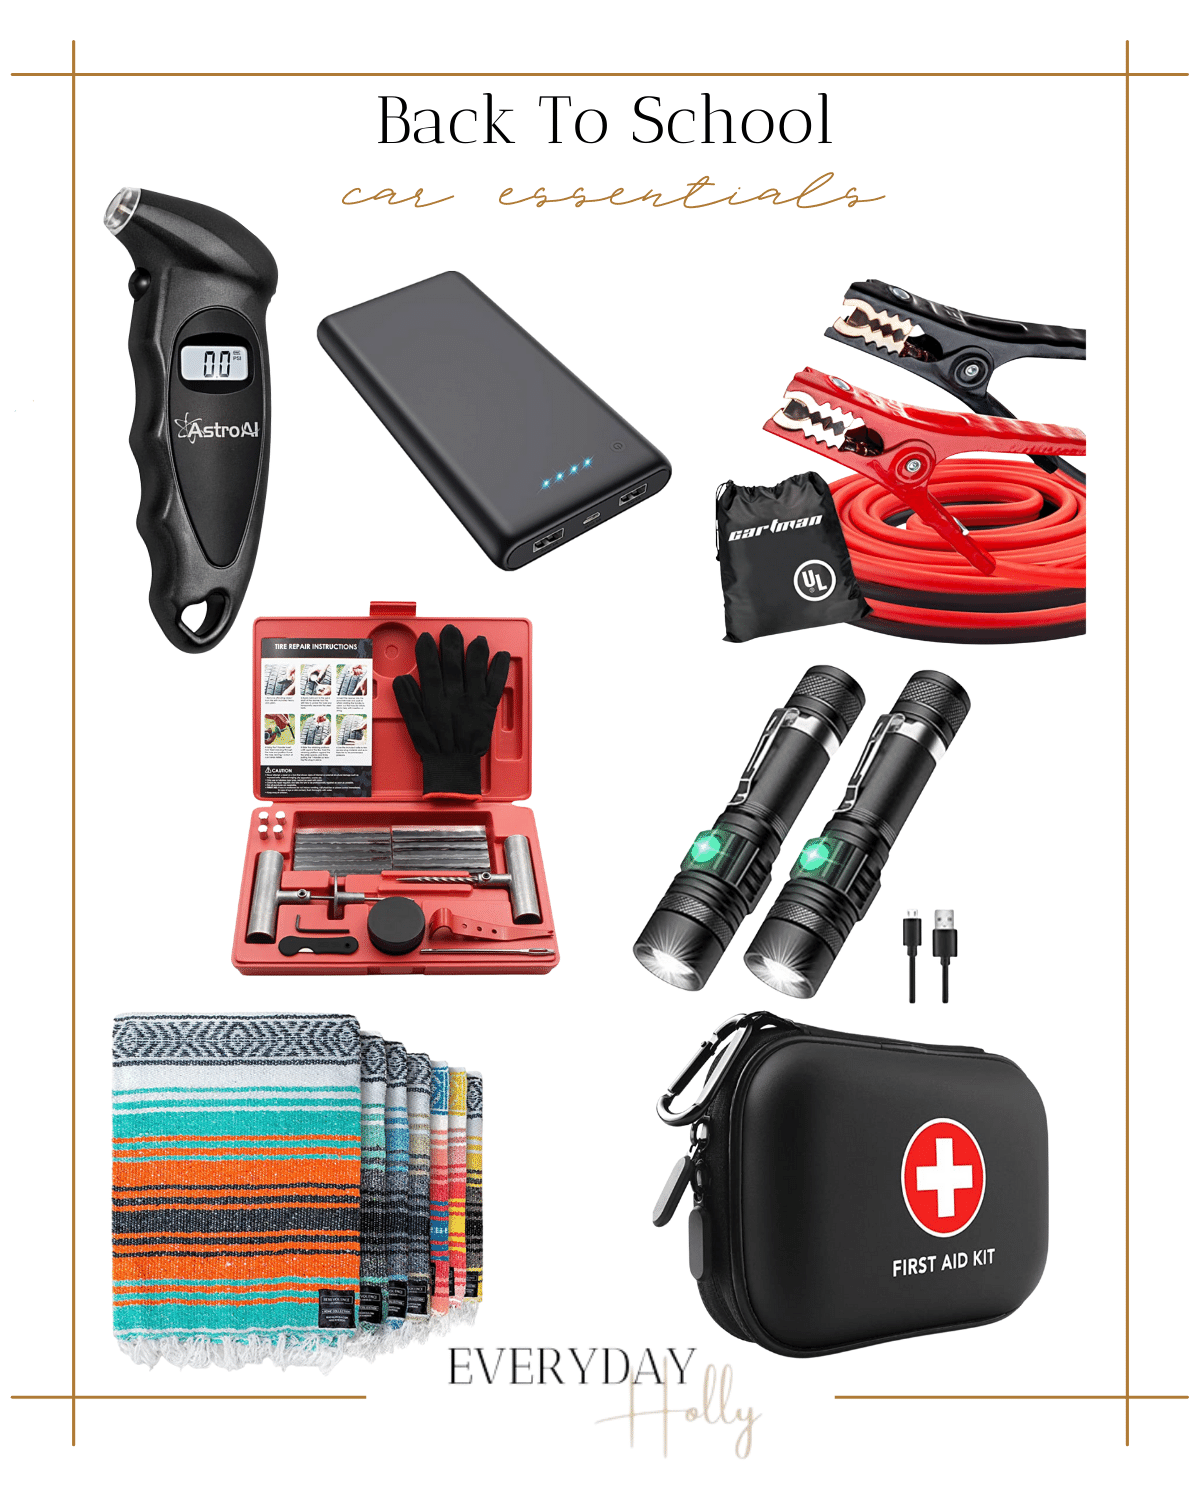 Back to School | Car Essentials

#backtoschool #caressentials #schoolyear #yearschool #backtoschoolyear #backtoschoolfavorites #flashlight #portablecharger #jumpercables #blanket #firstaidkit #offtocollege #collegefavorites #collegemusthaves #collegeessentials